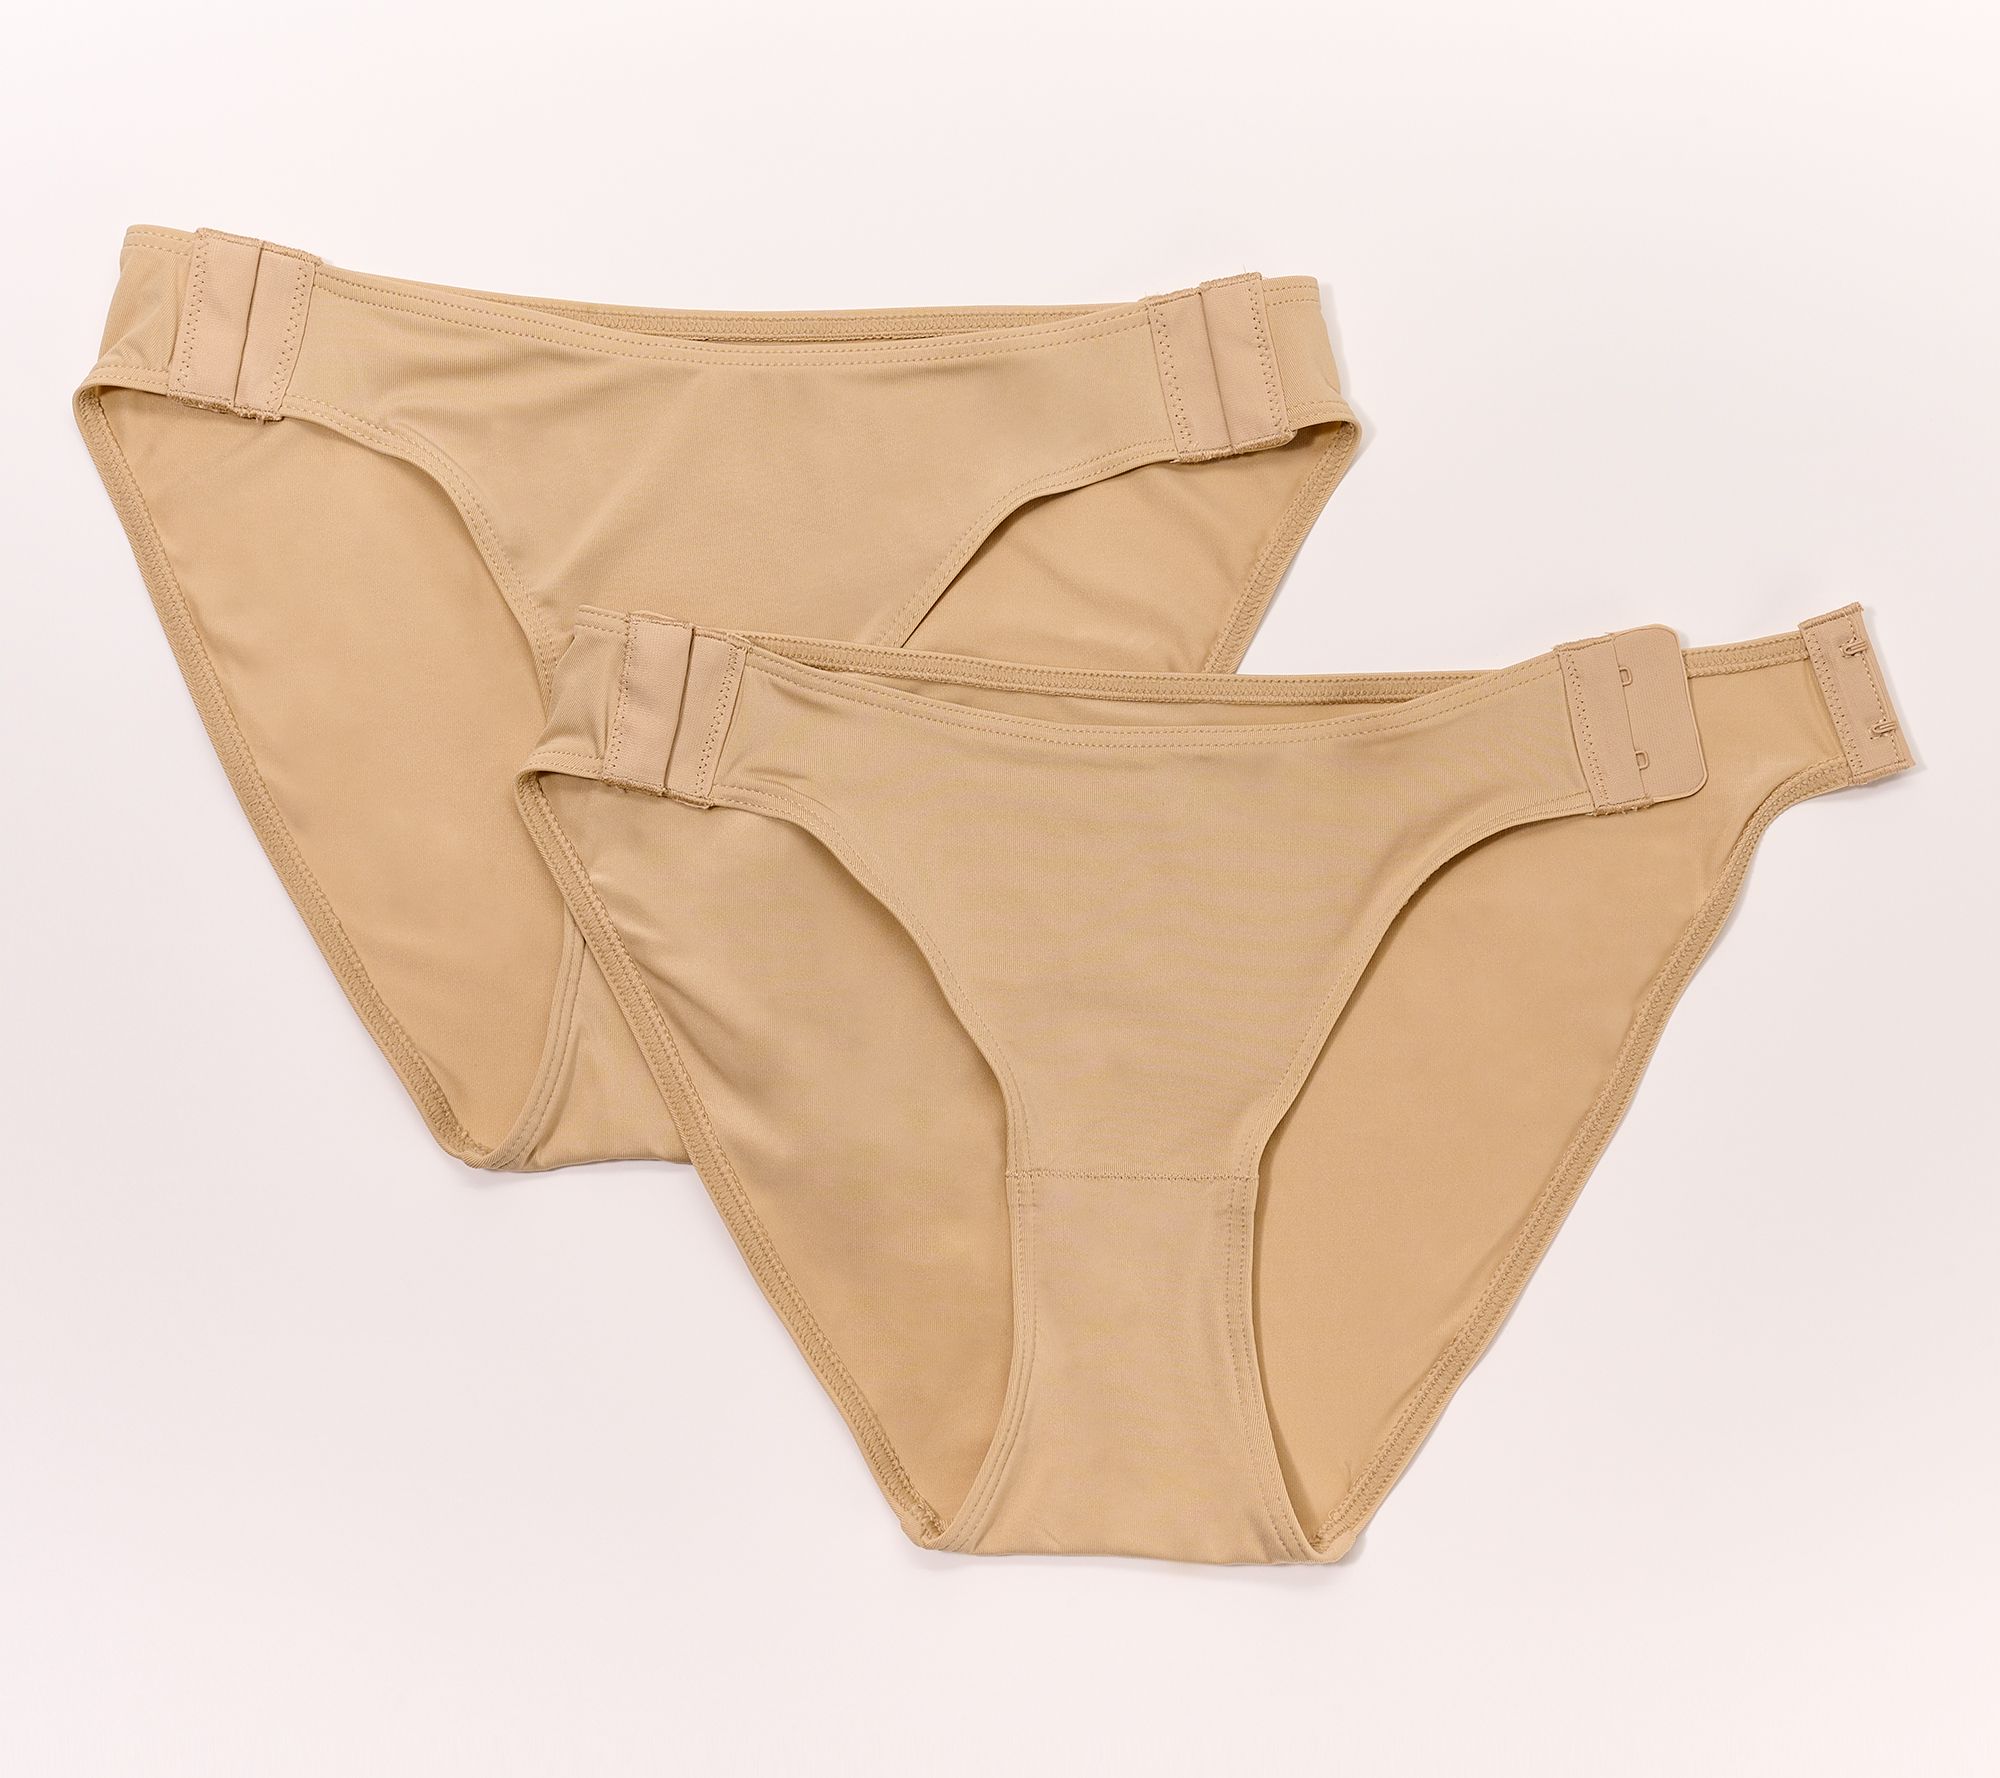 Slick Chicks Women's Adaptive Urinary Incontinence Briefs with Hook and  Loop - Beige XS